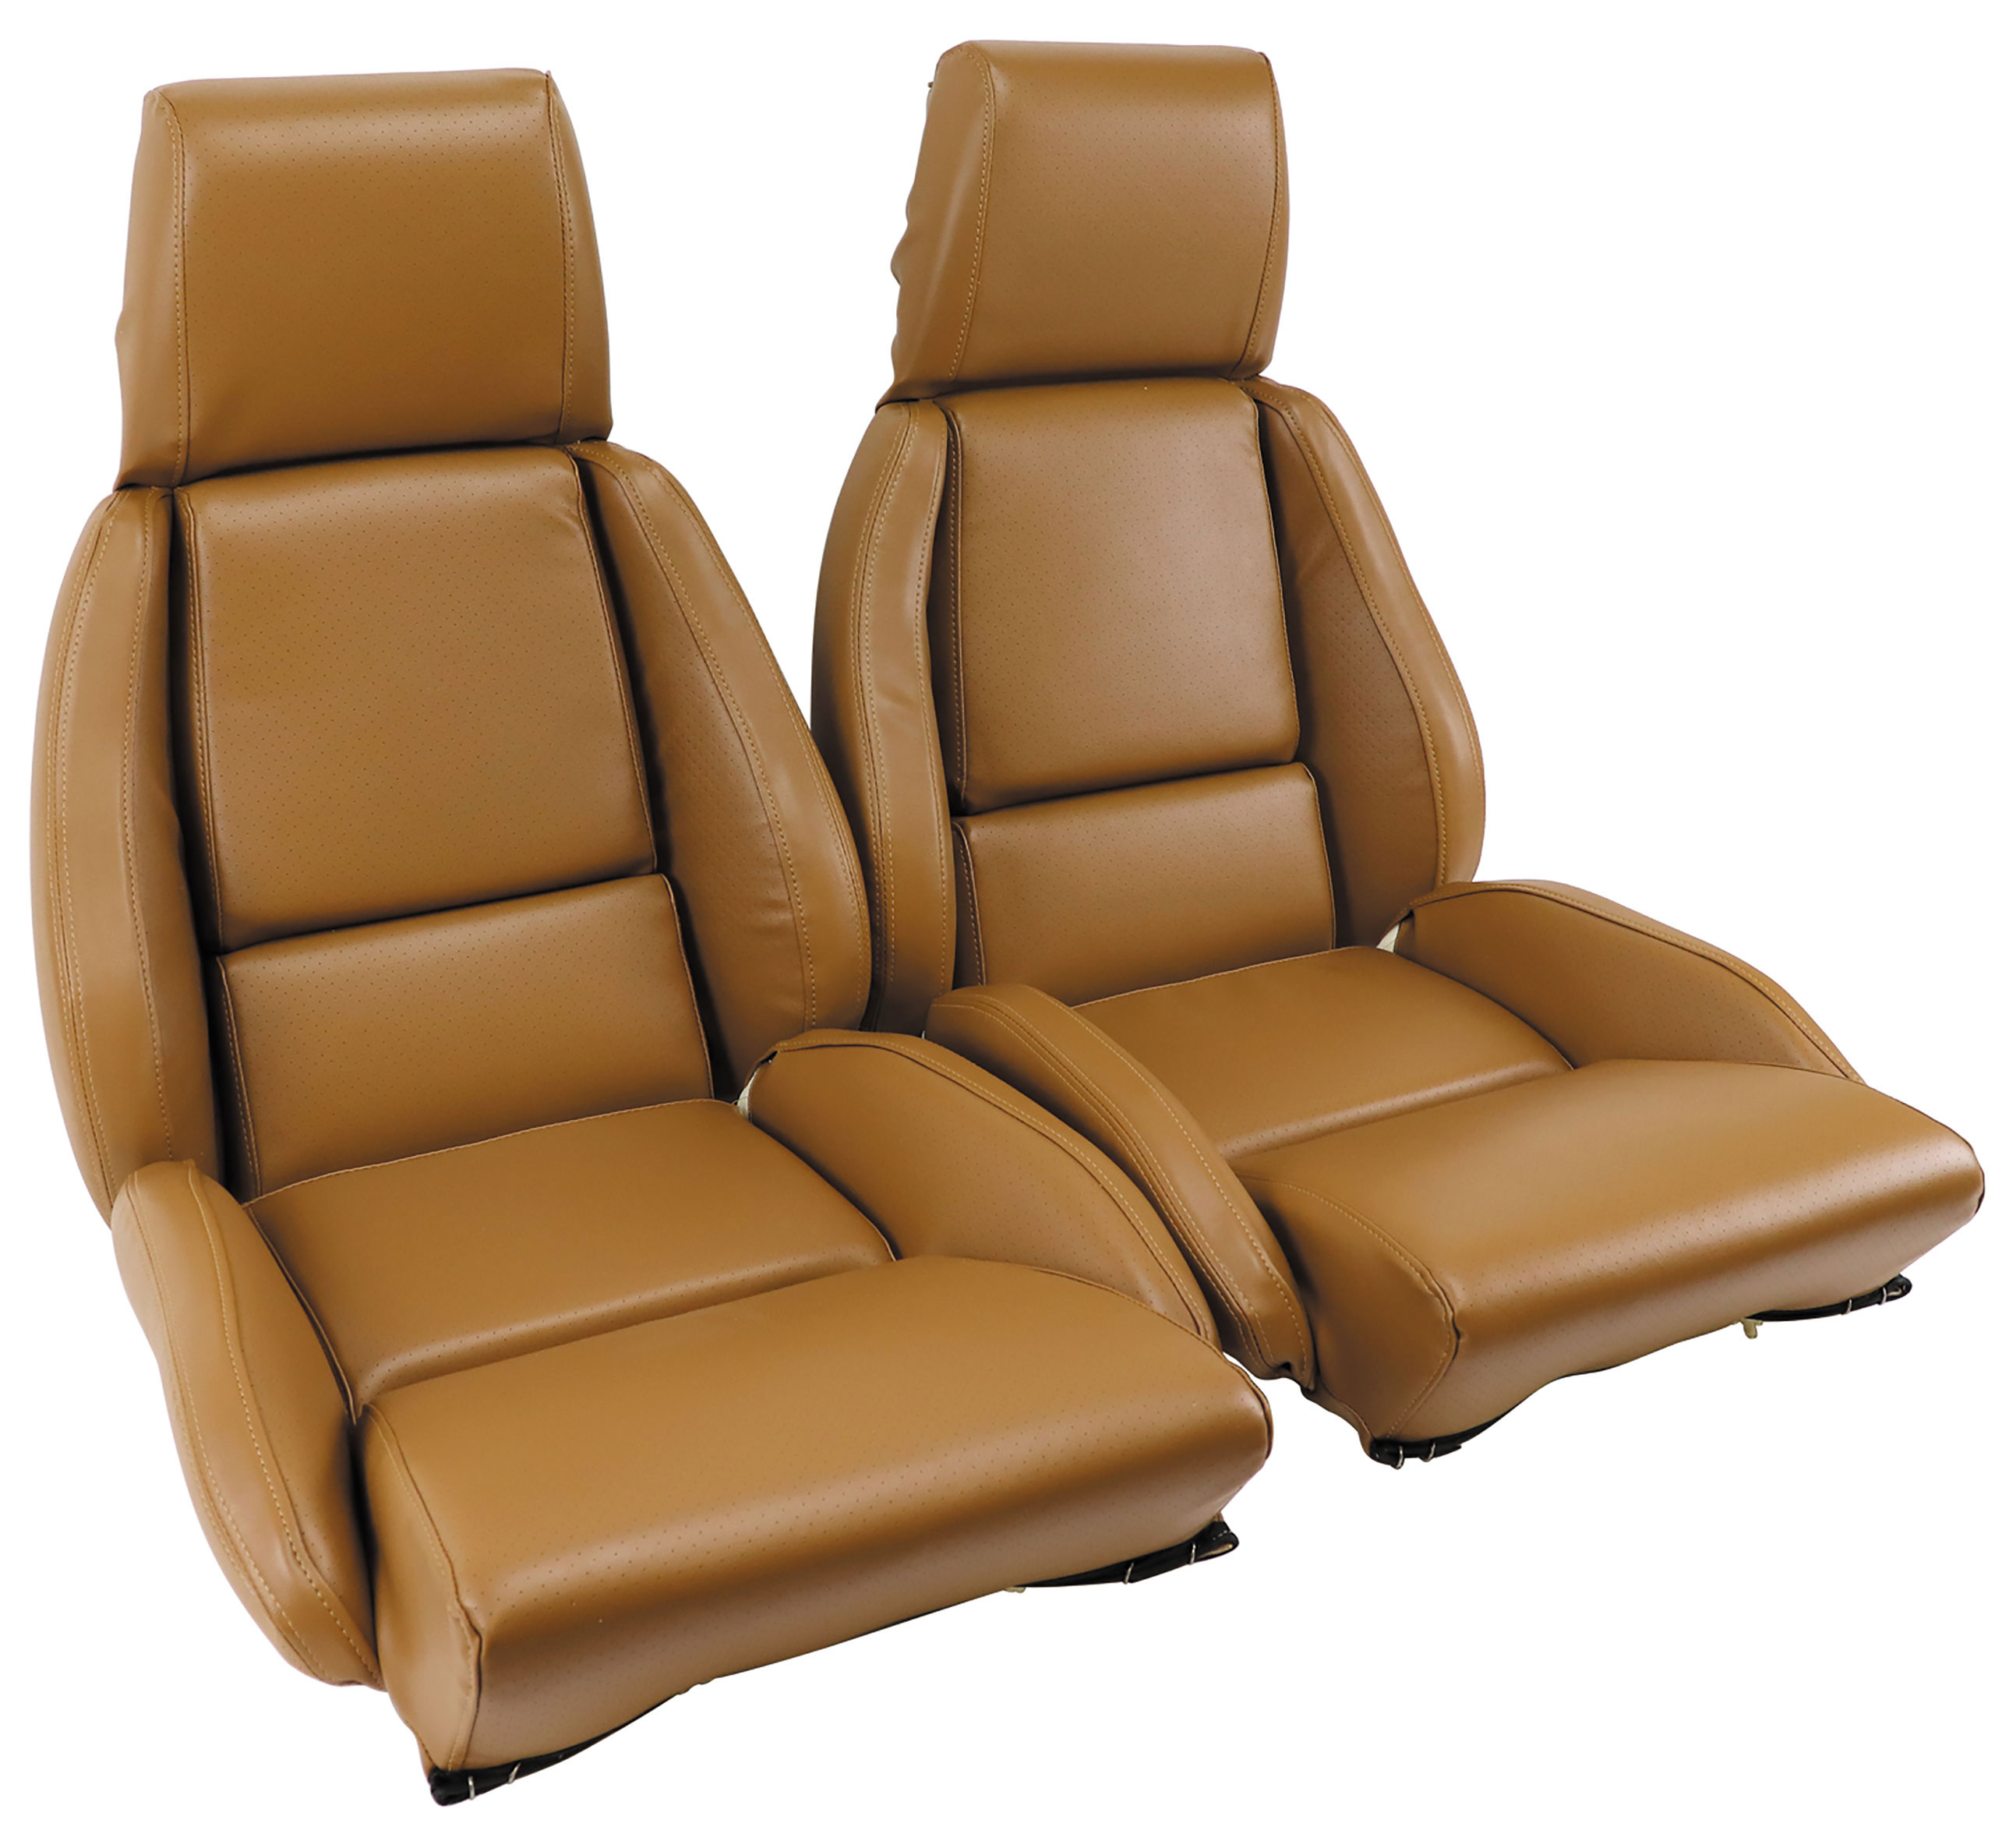 88 Corvette C4 OE Style Leather-Like Standard Seat Covers W/O Perforated Inserts Saddle CA-468778 